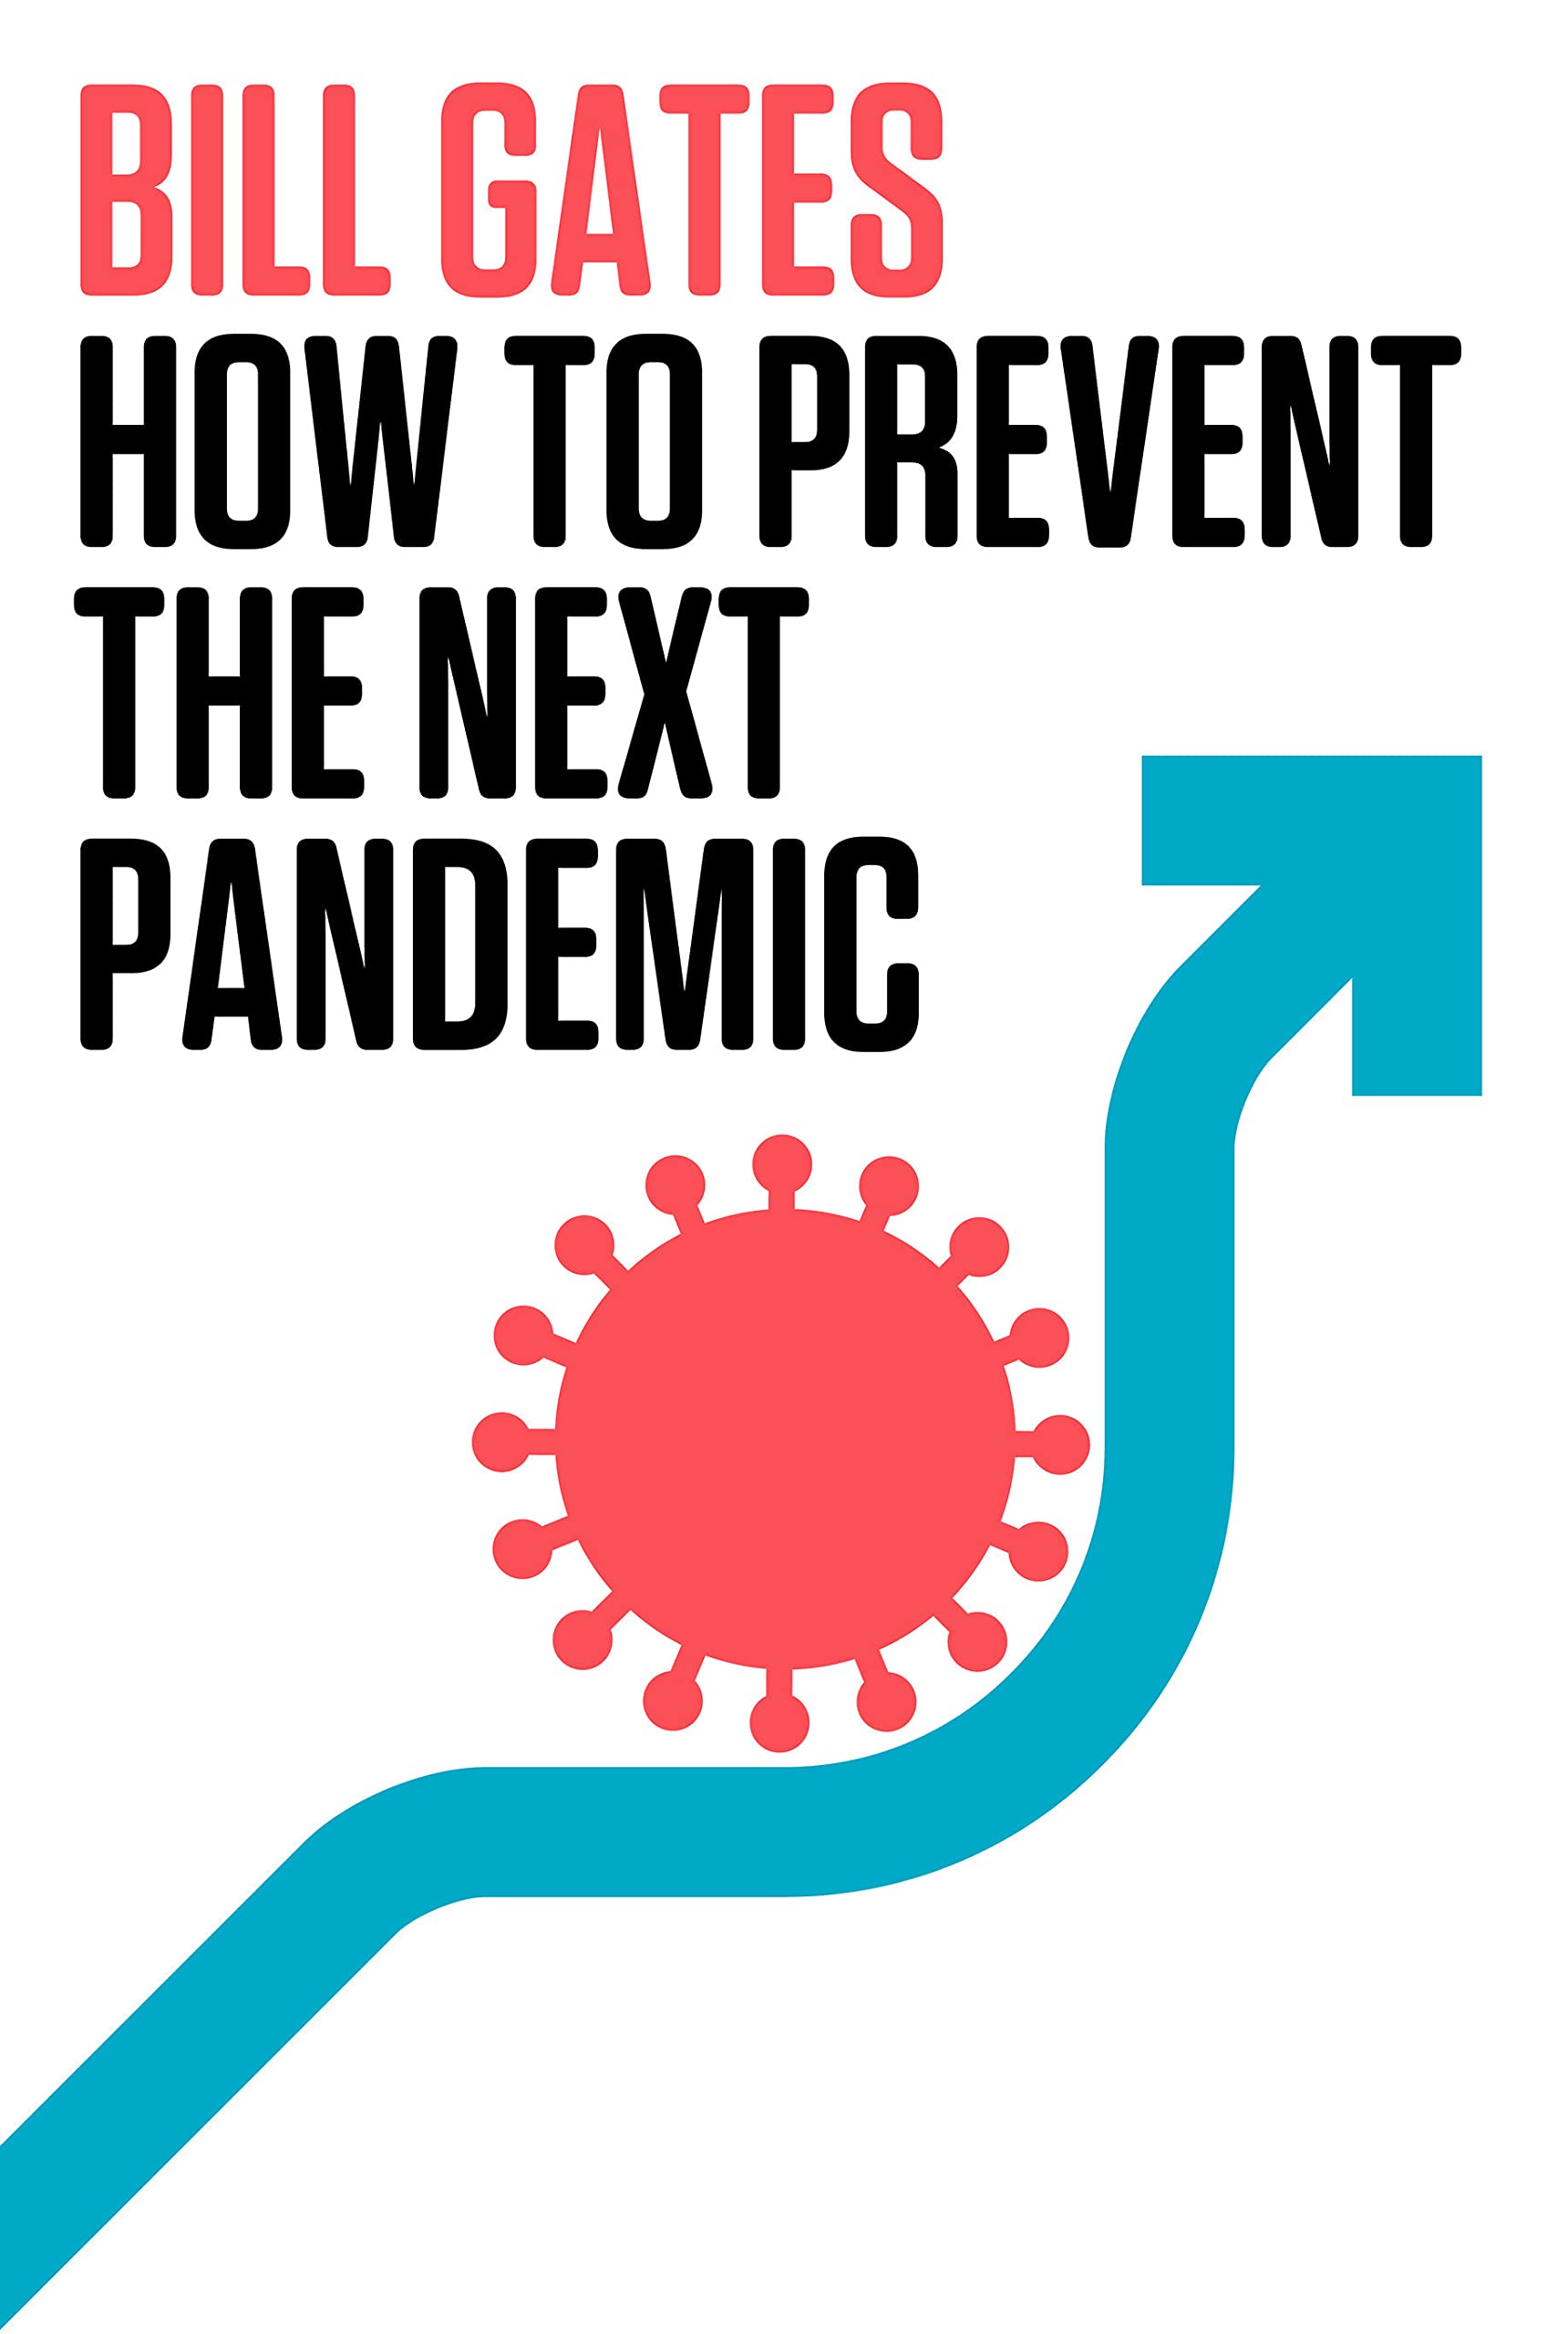 Image for "How to Prevent the Next Pandemic"